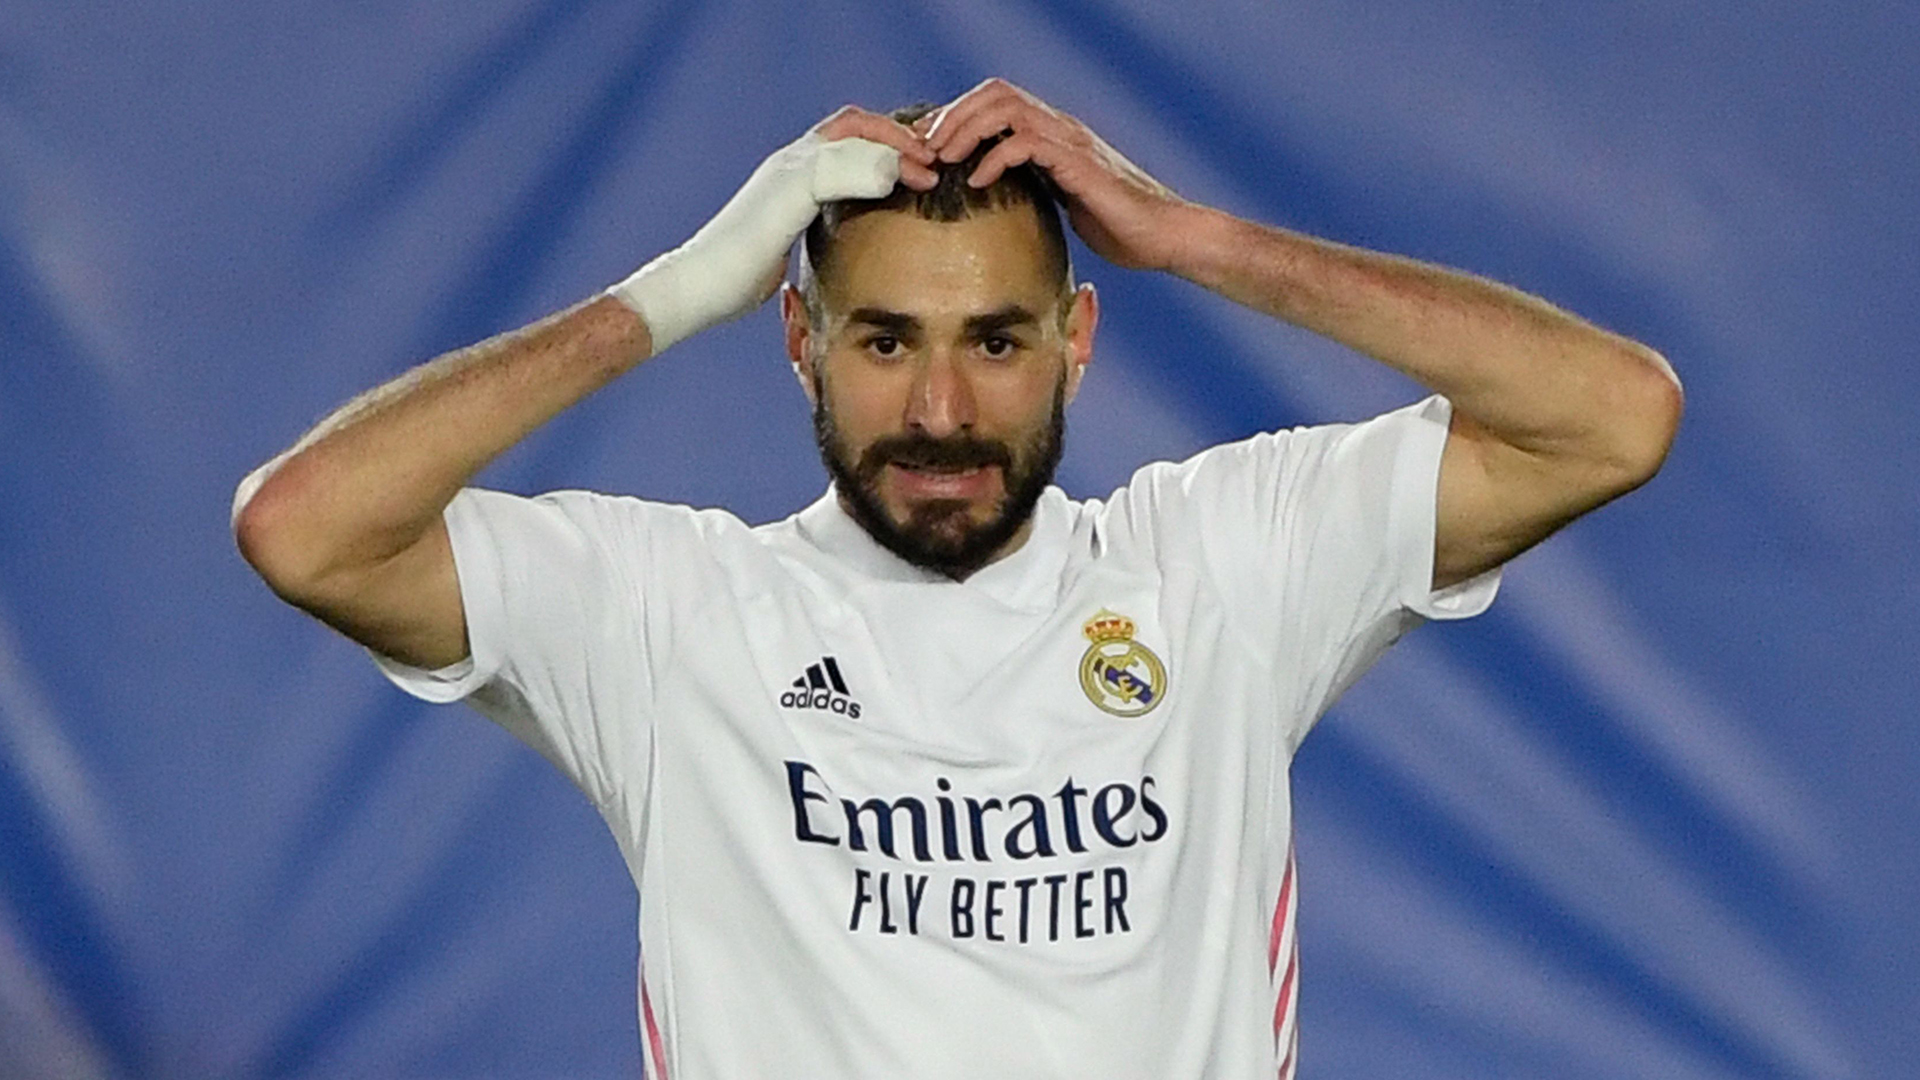 Real Madrid star Benzema to face trial over Valbuena sex tape case